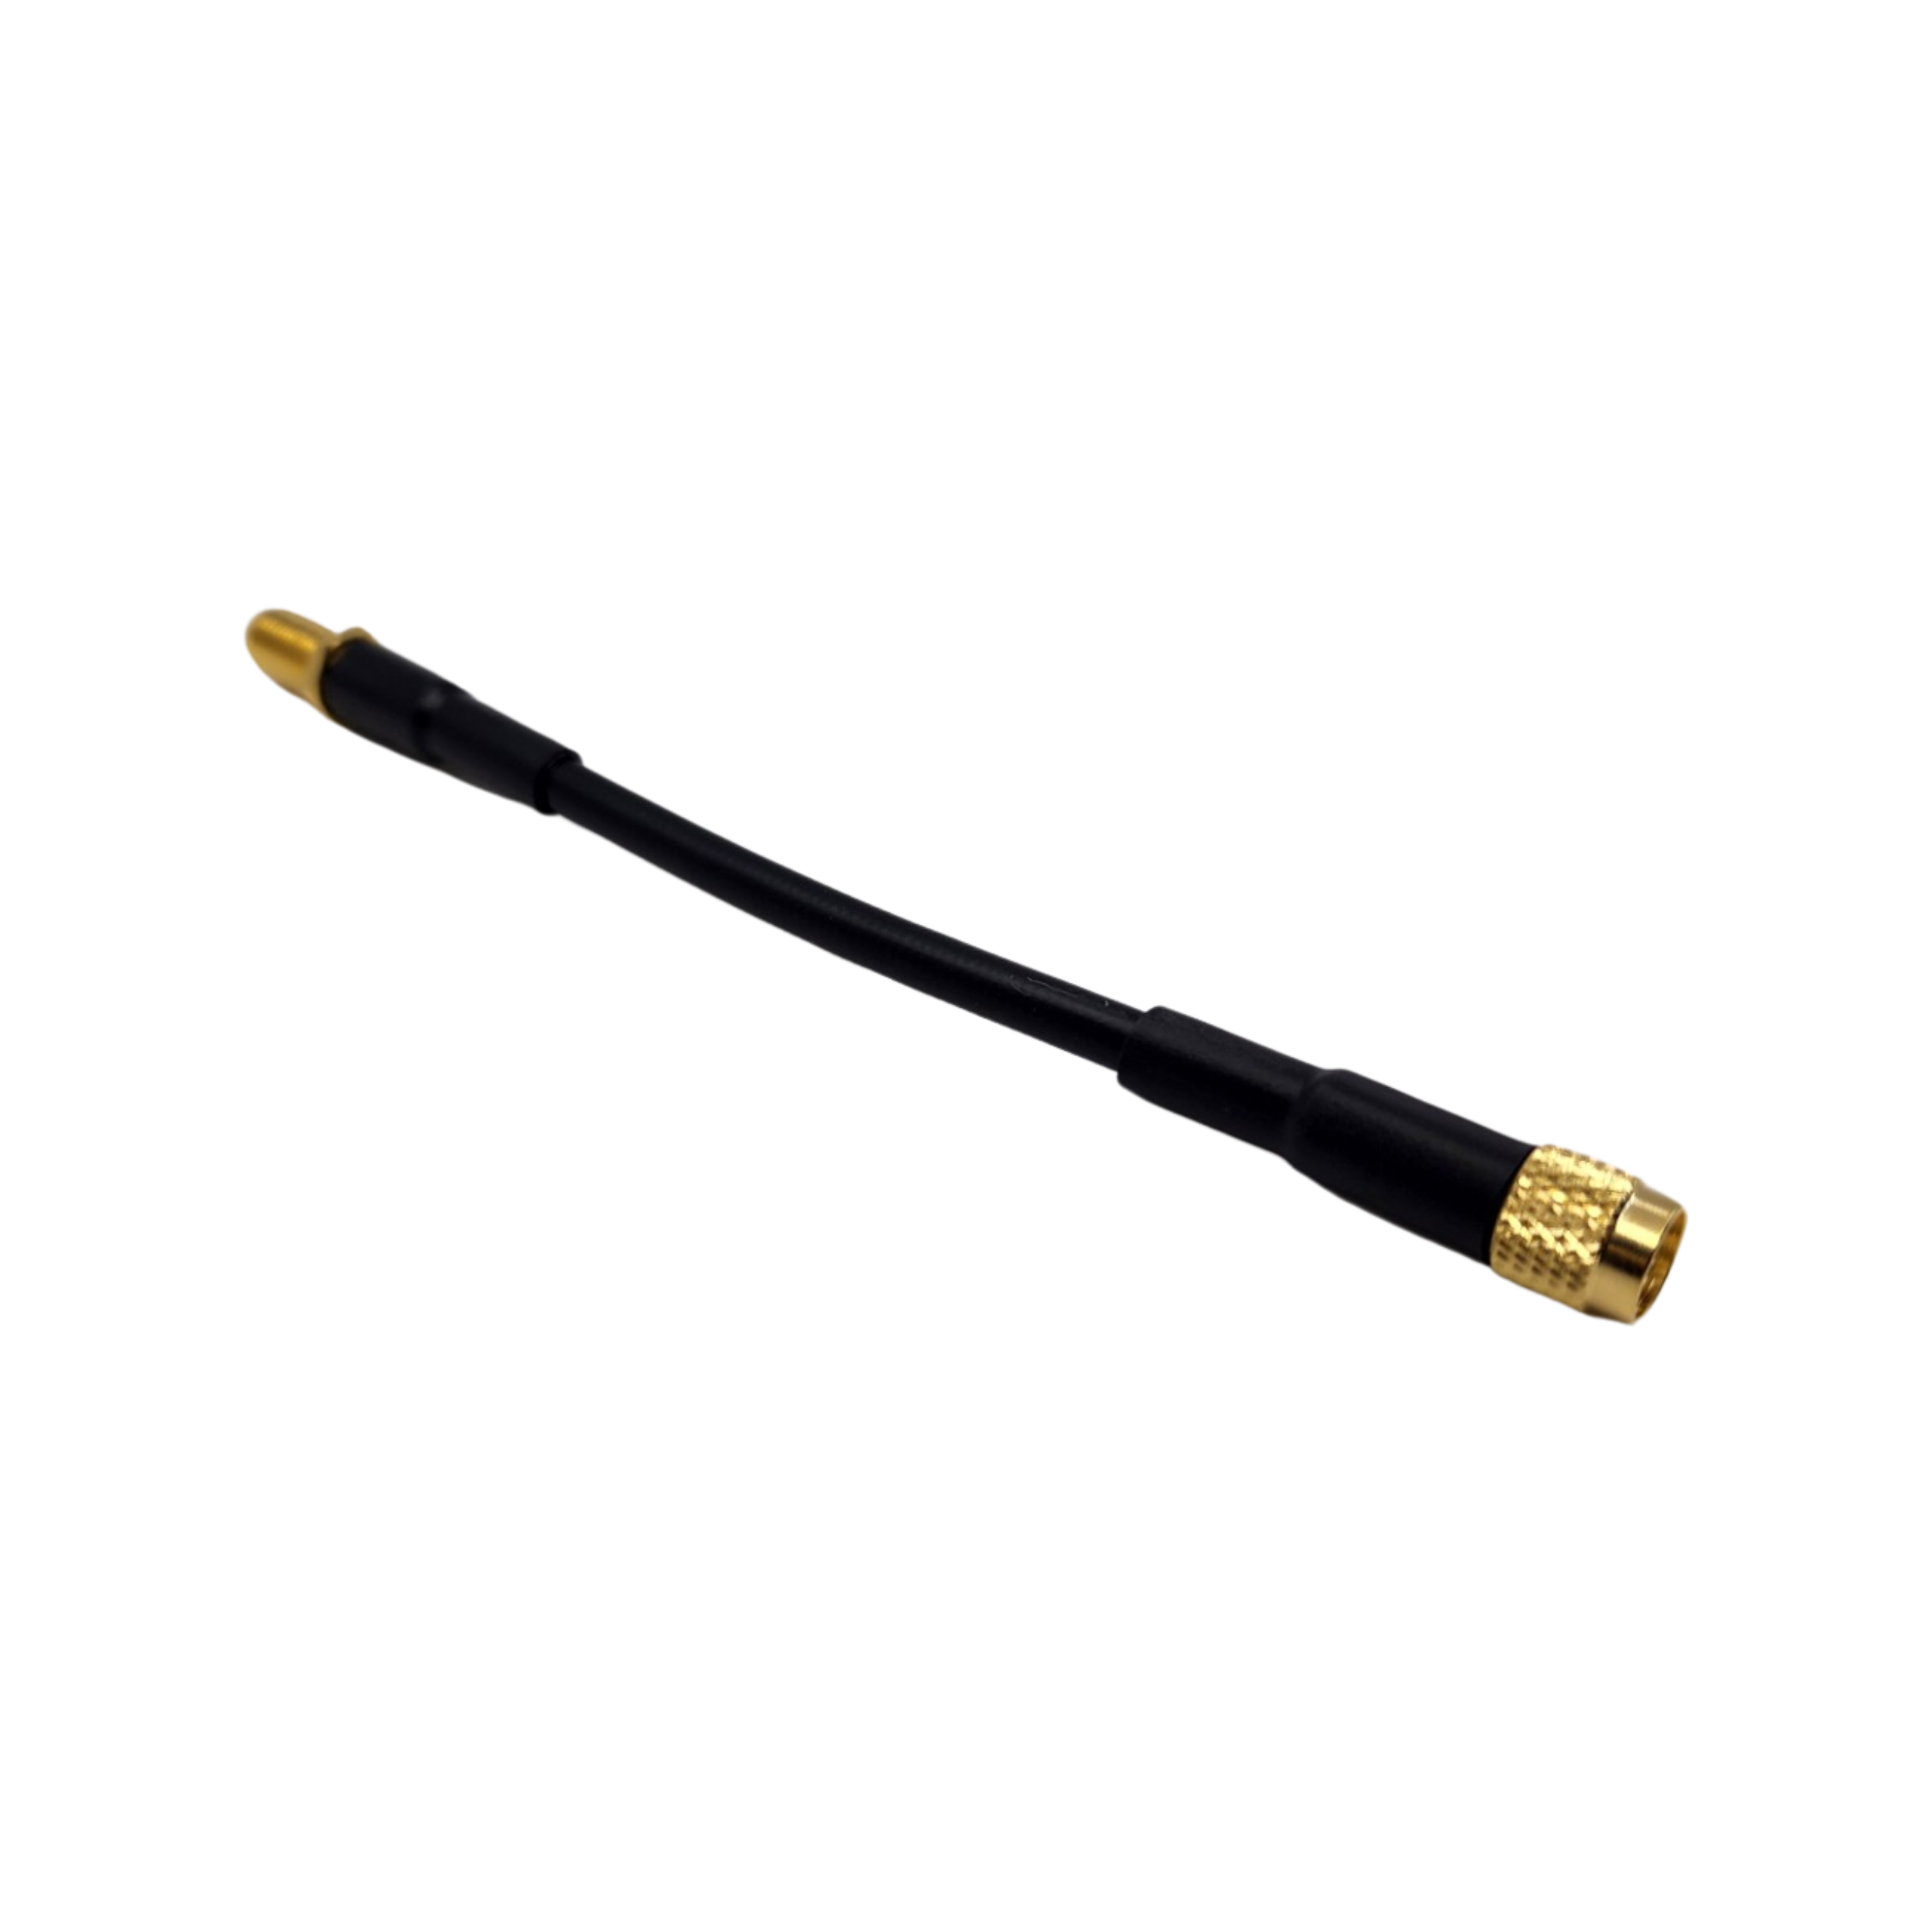 TrueRC SMA Extender Cable for FPV Goggles 120mm